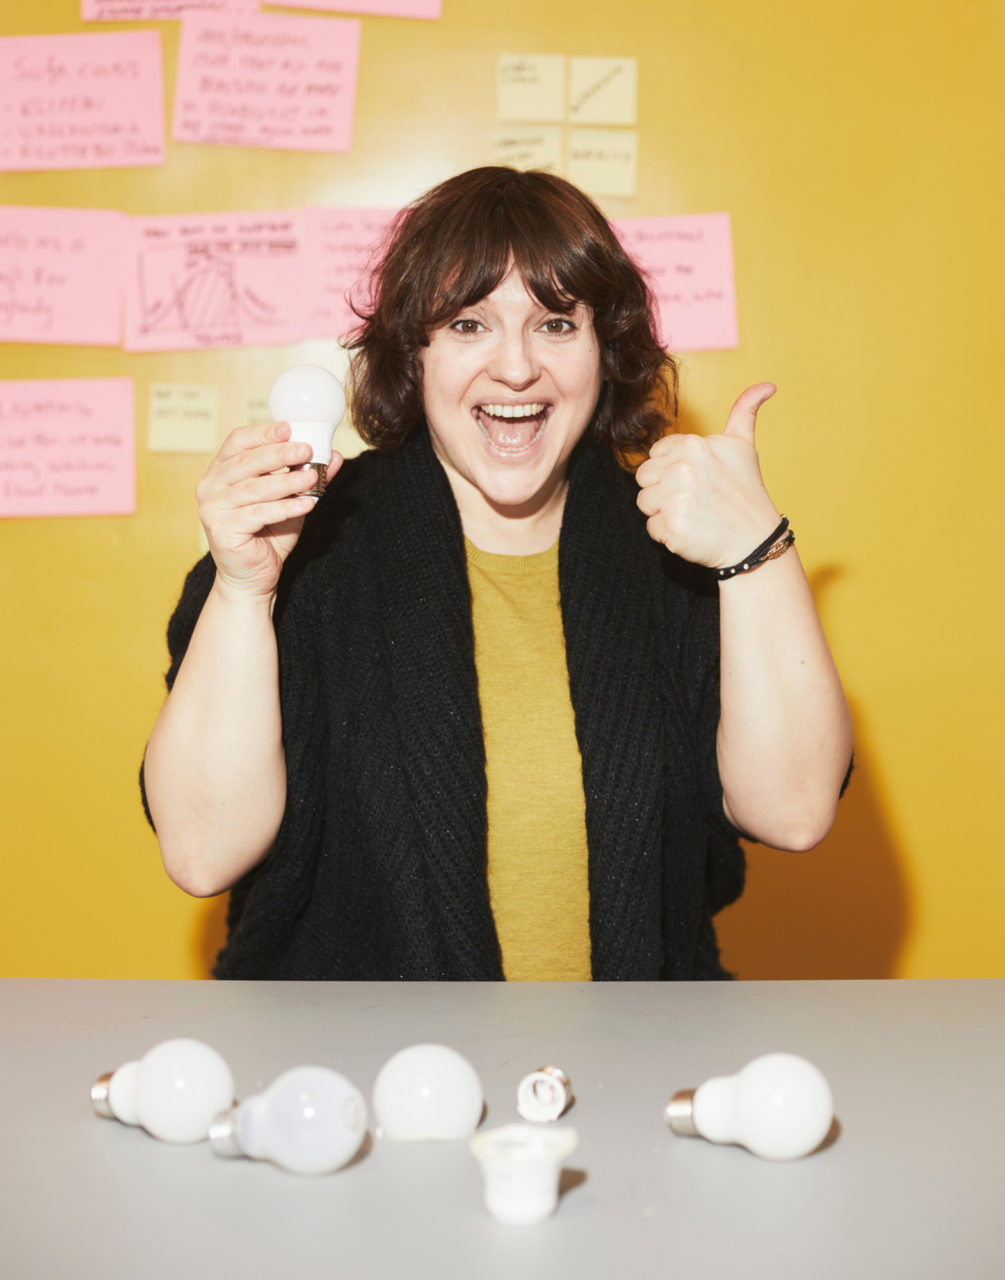 Paulina Pajak, smiling, sits at table scattered with LED bulb parts, holding a LED bulb and making a thumbs-up.